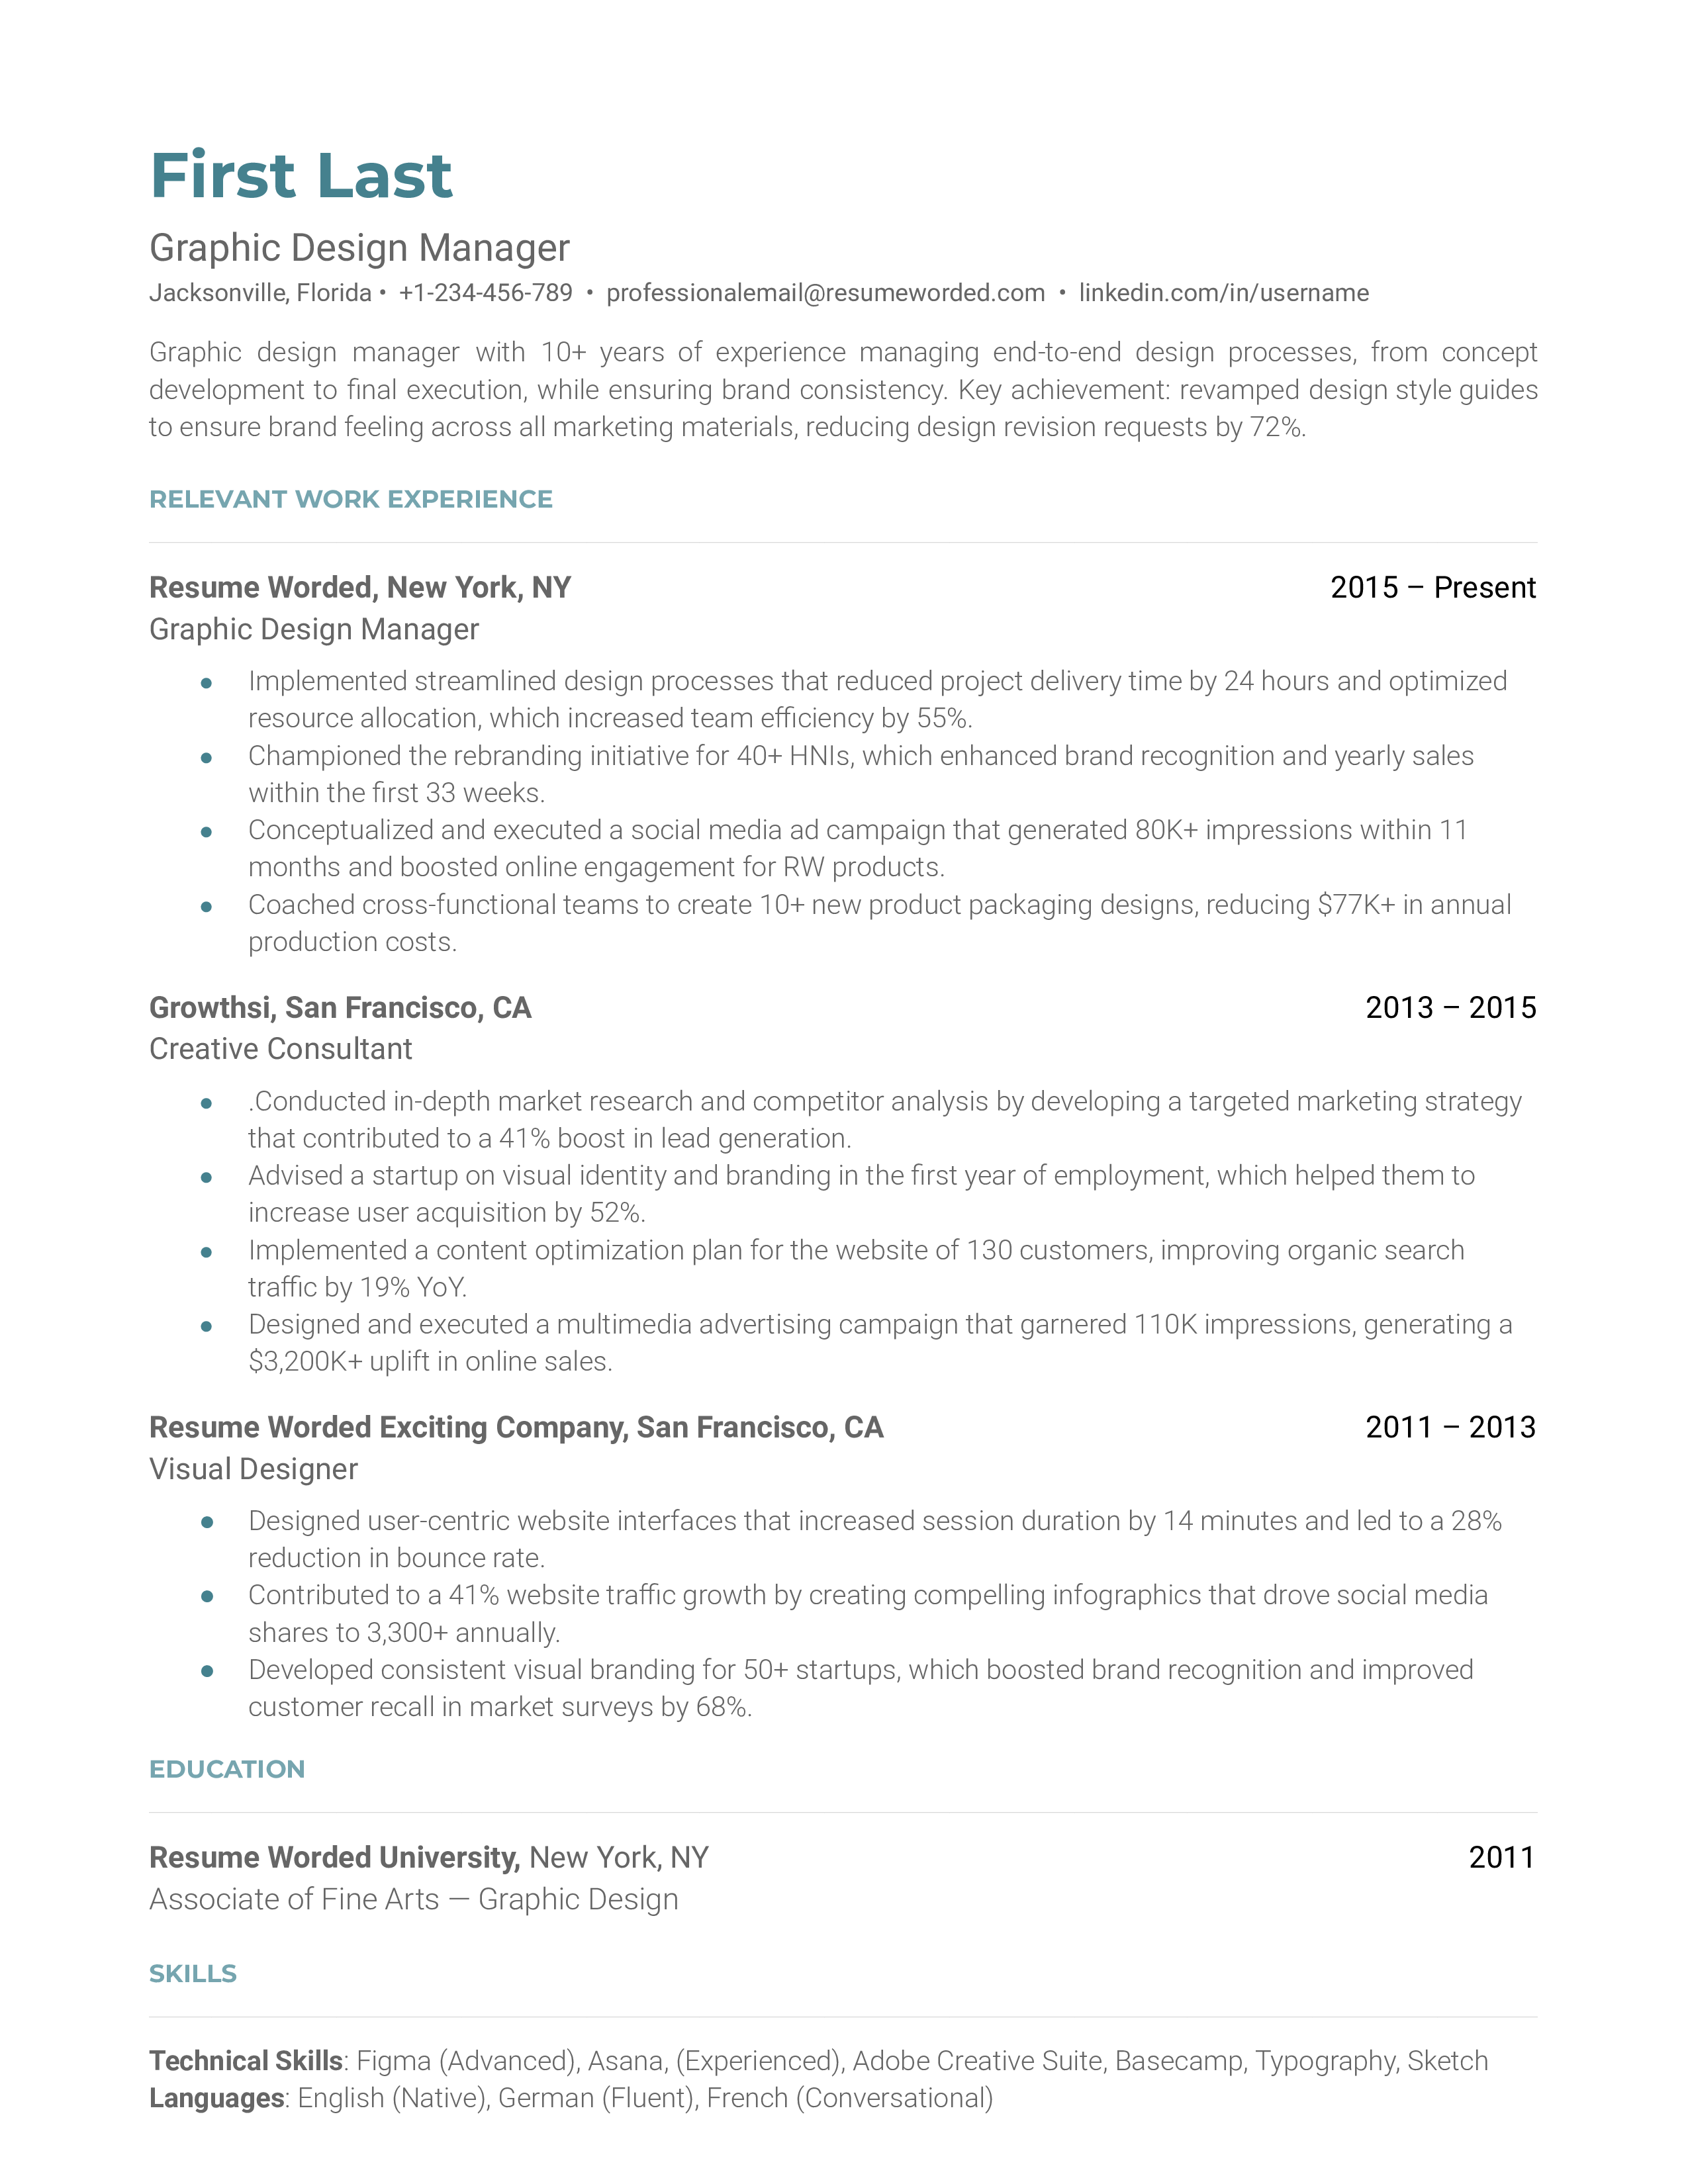 An organized and visually balanced Graphic Design Manager's CV.